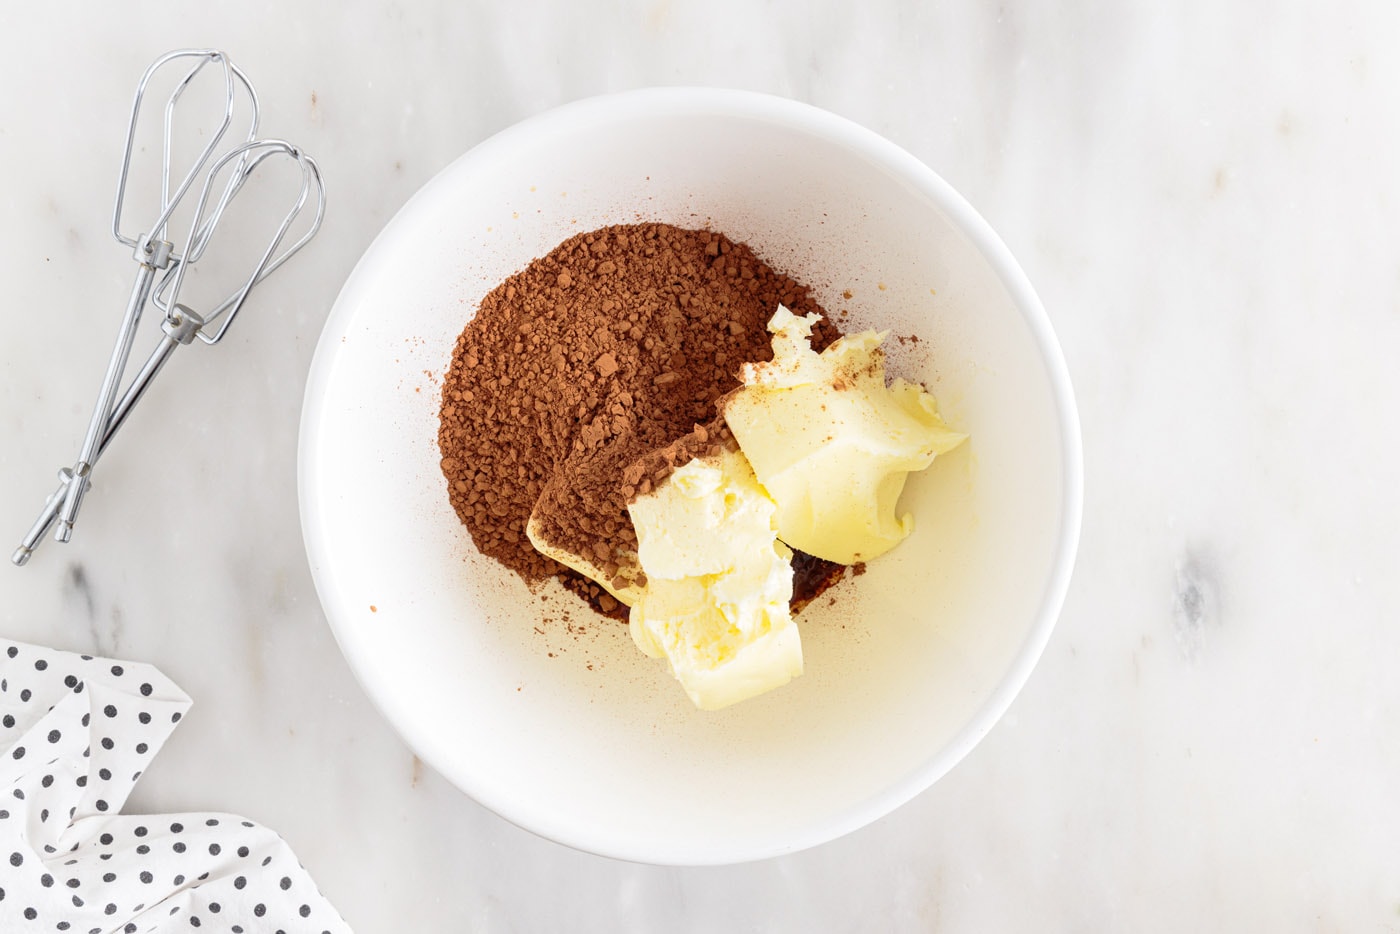 butter and cocoa powder in a mixing bowl